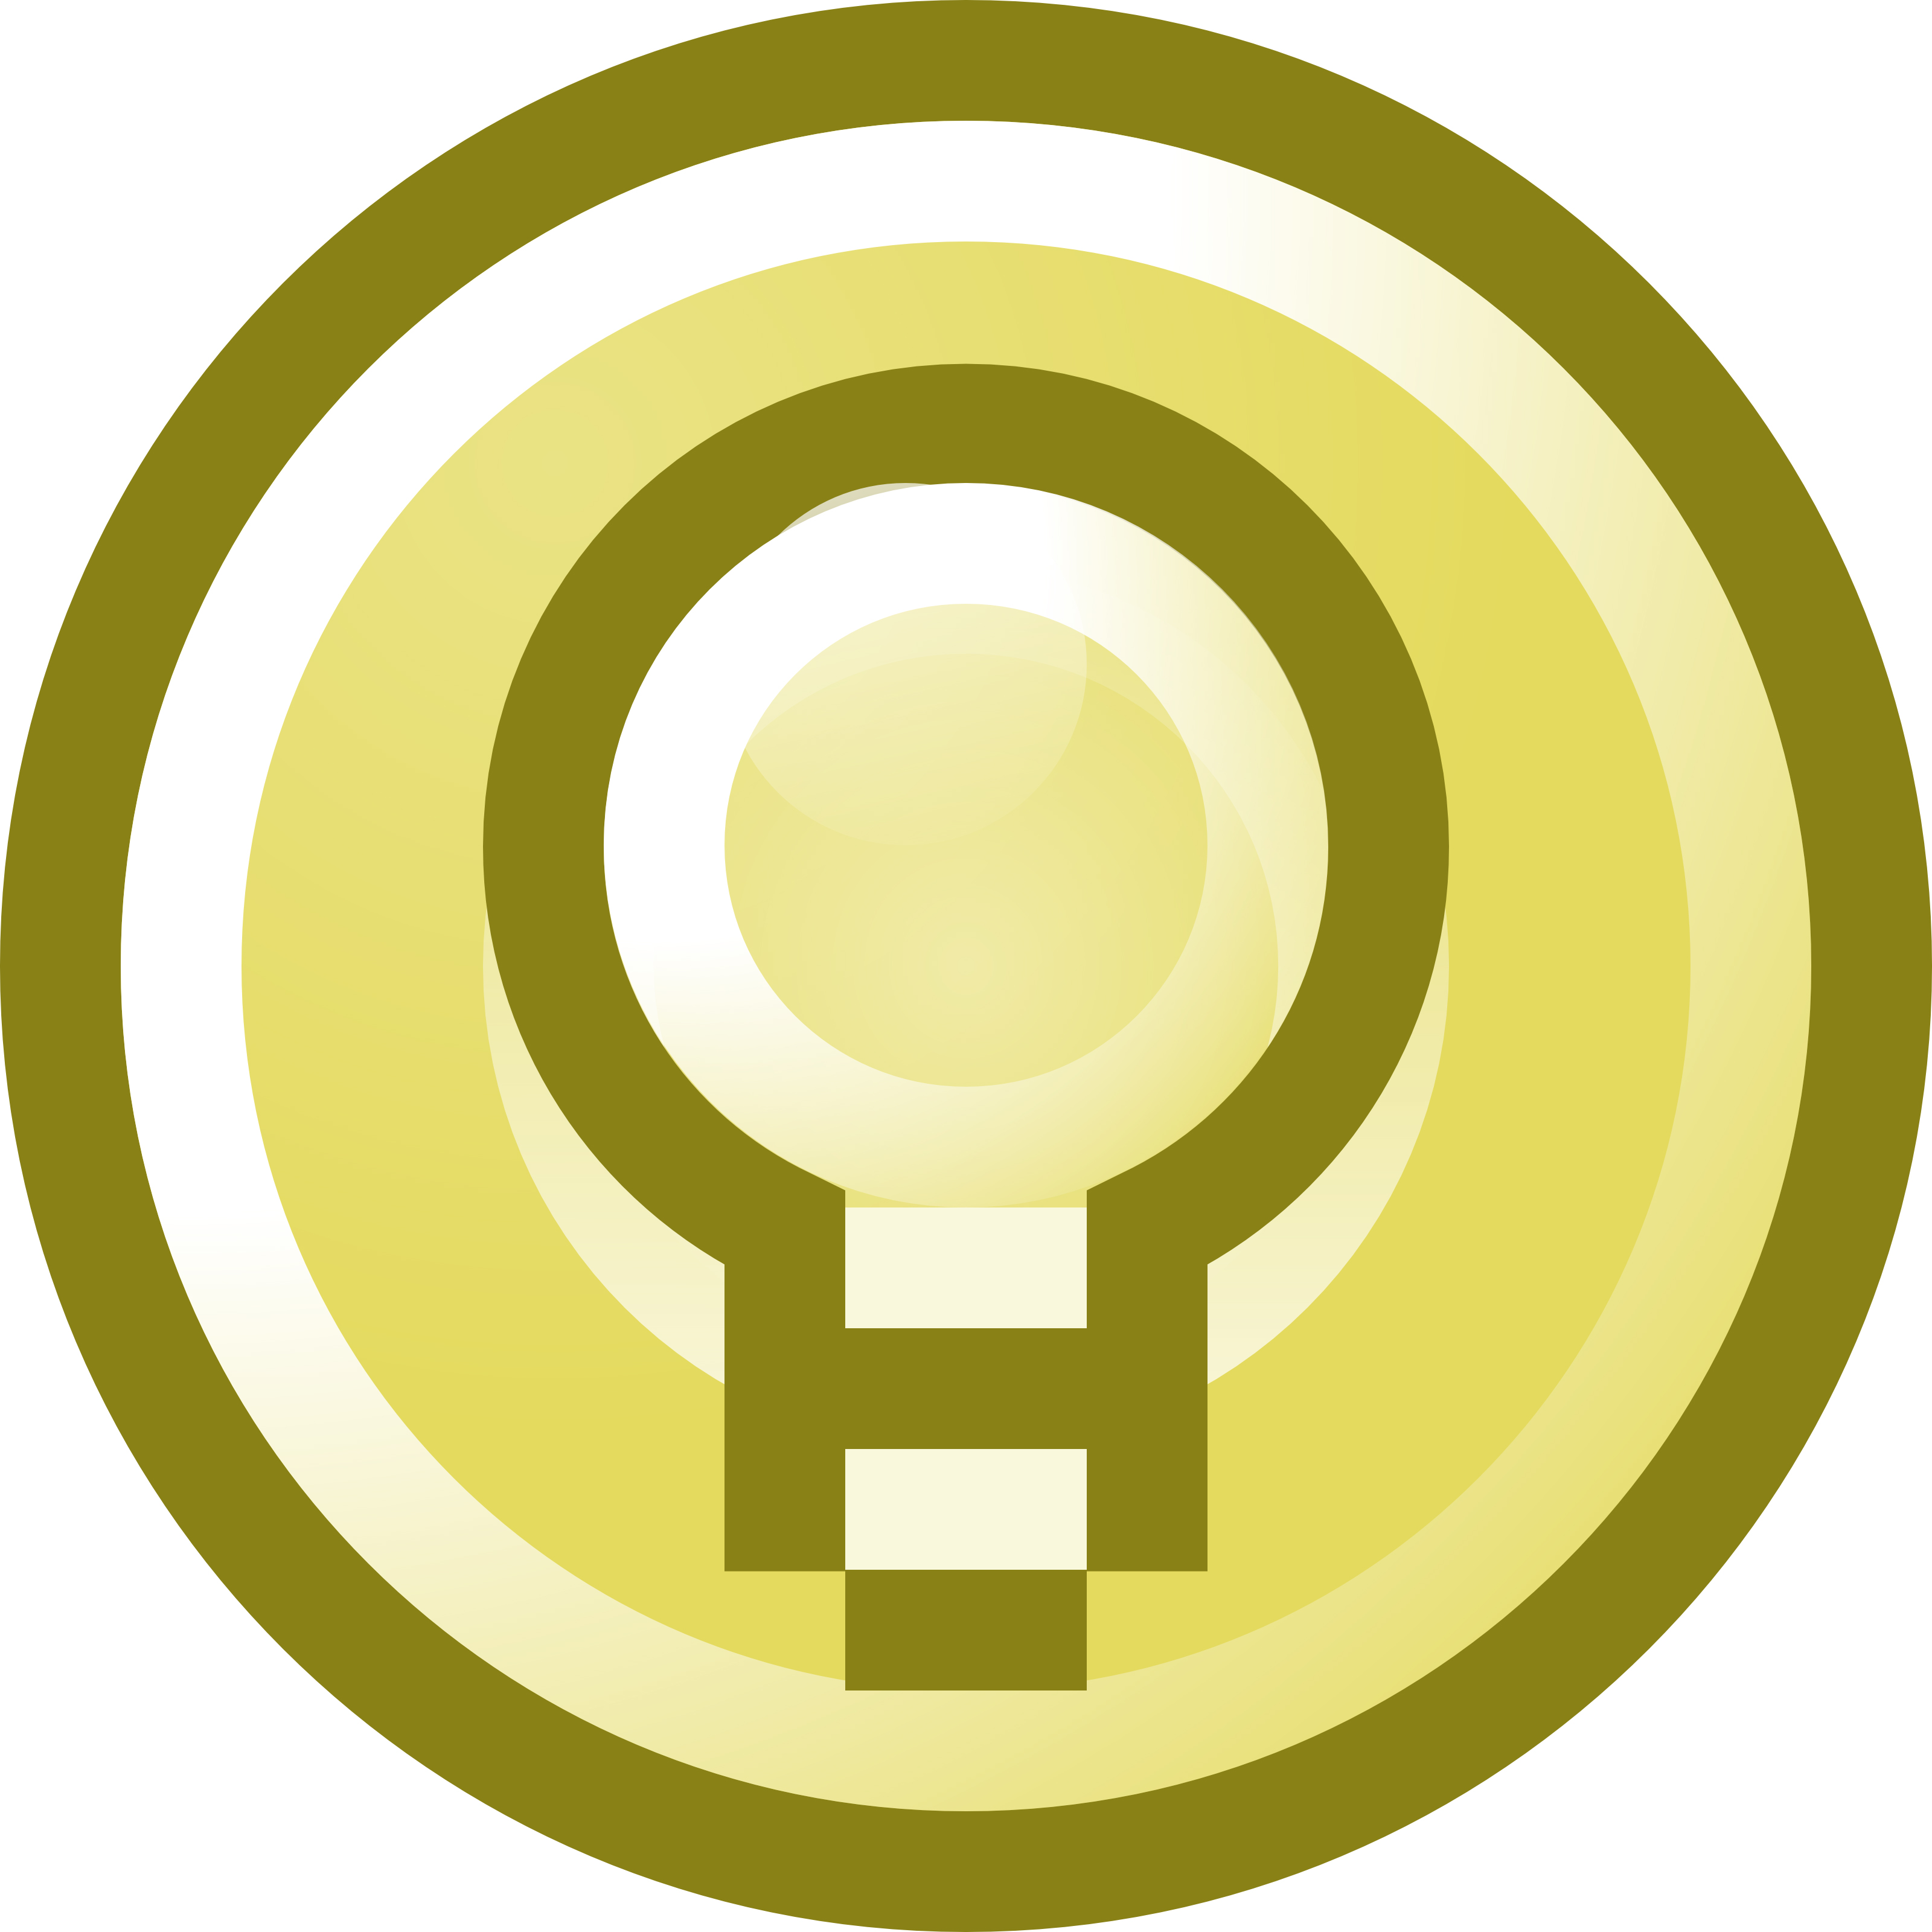 Download Free Vector Illustration Of A Light Bulb Icon